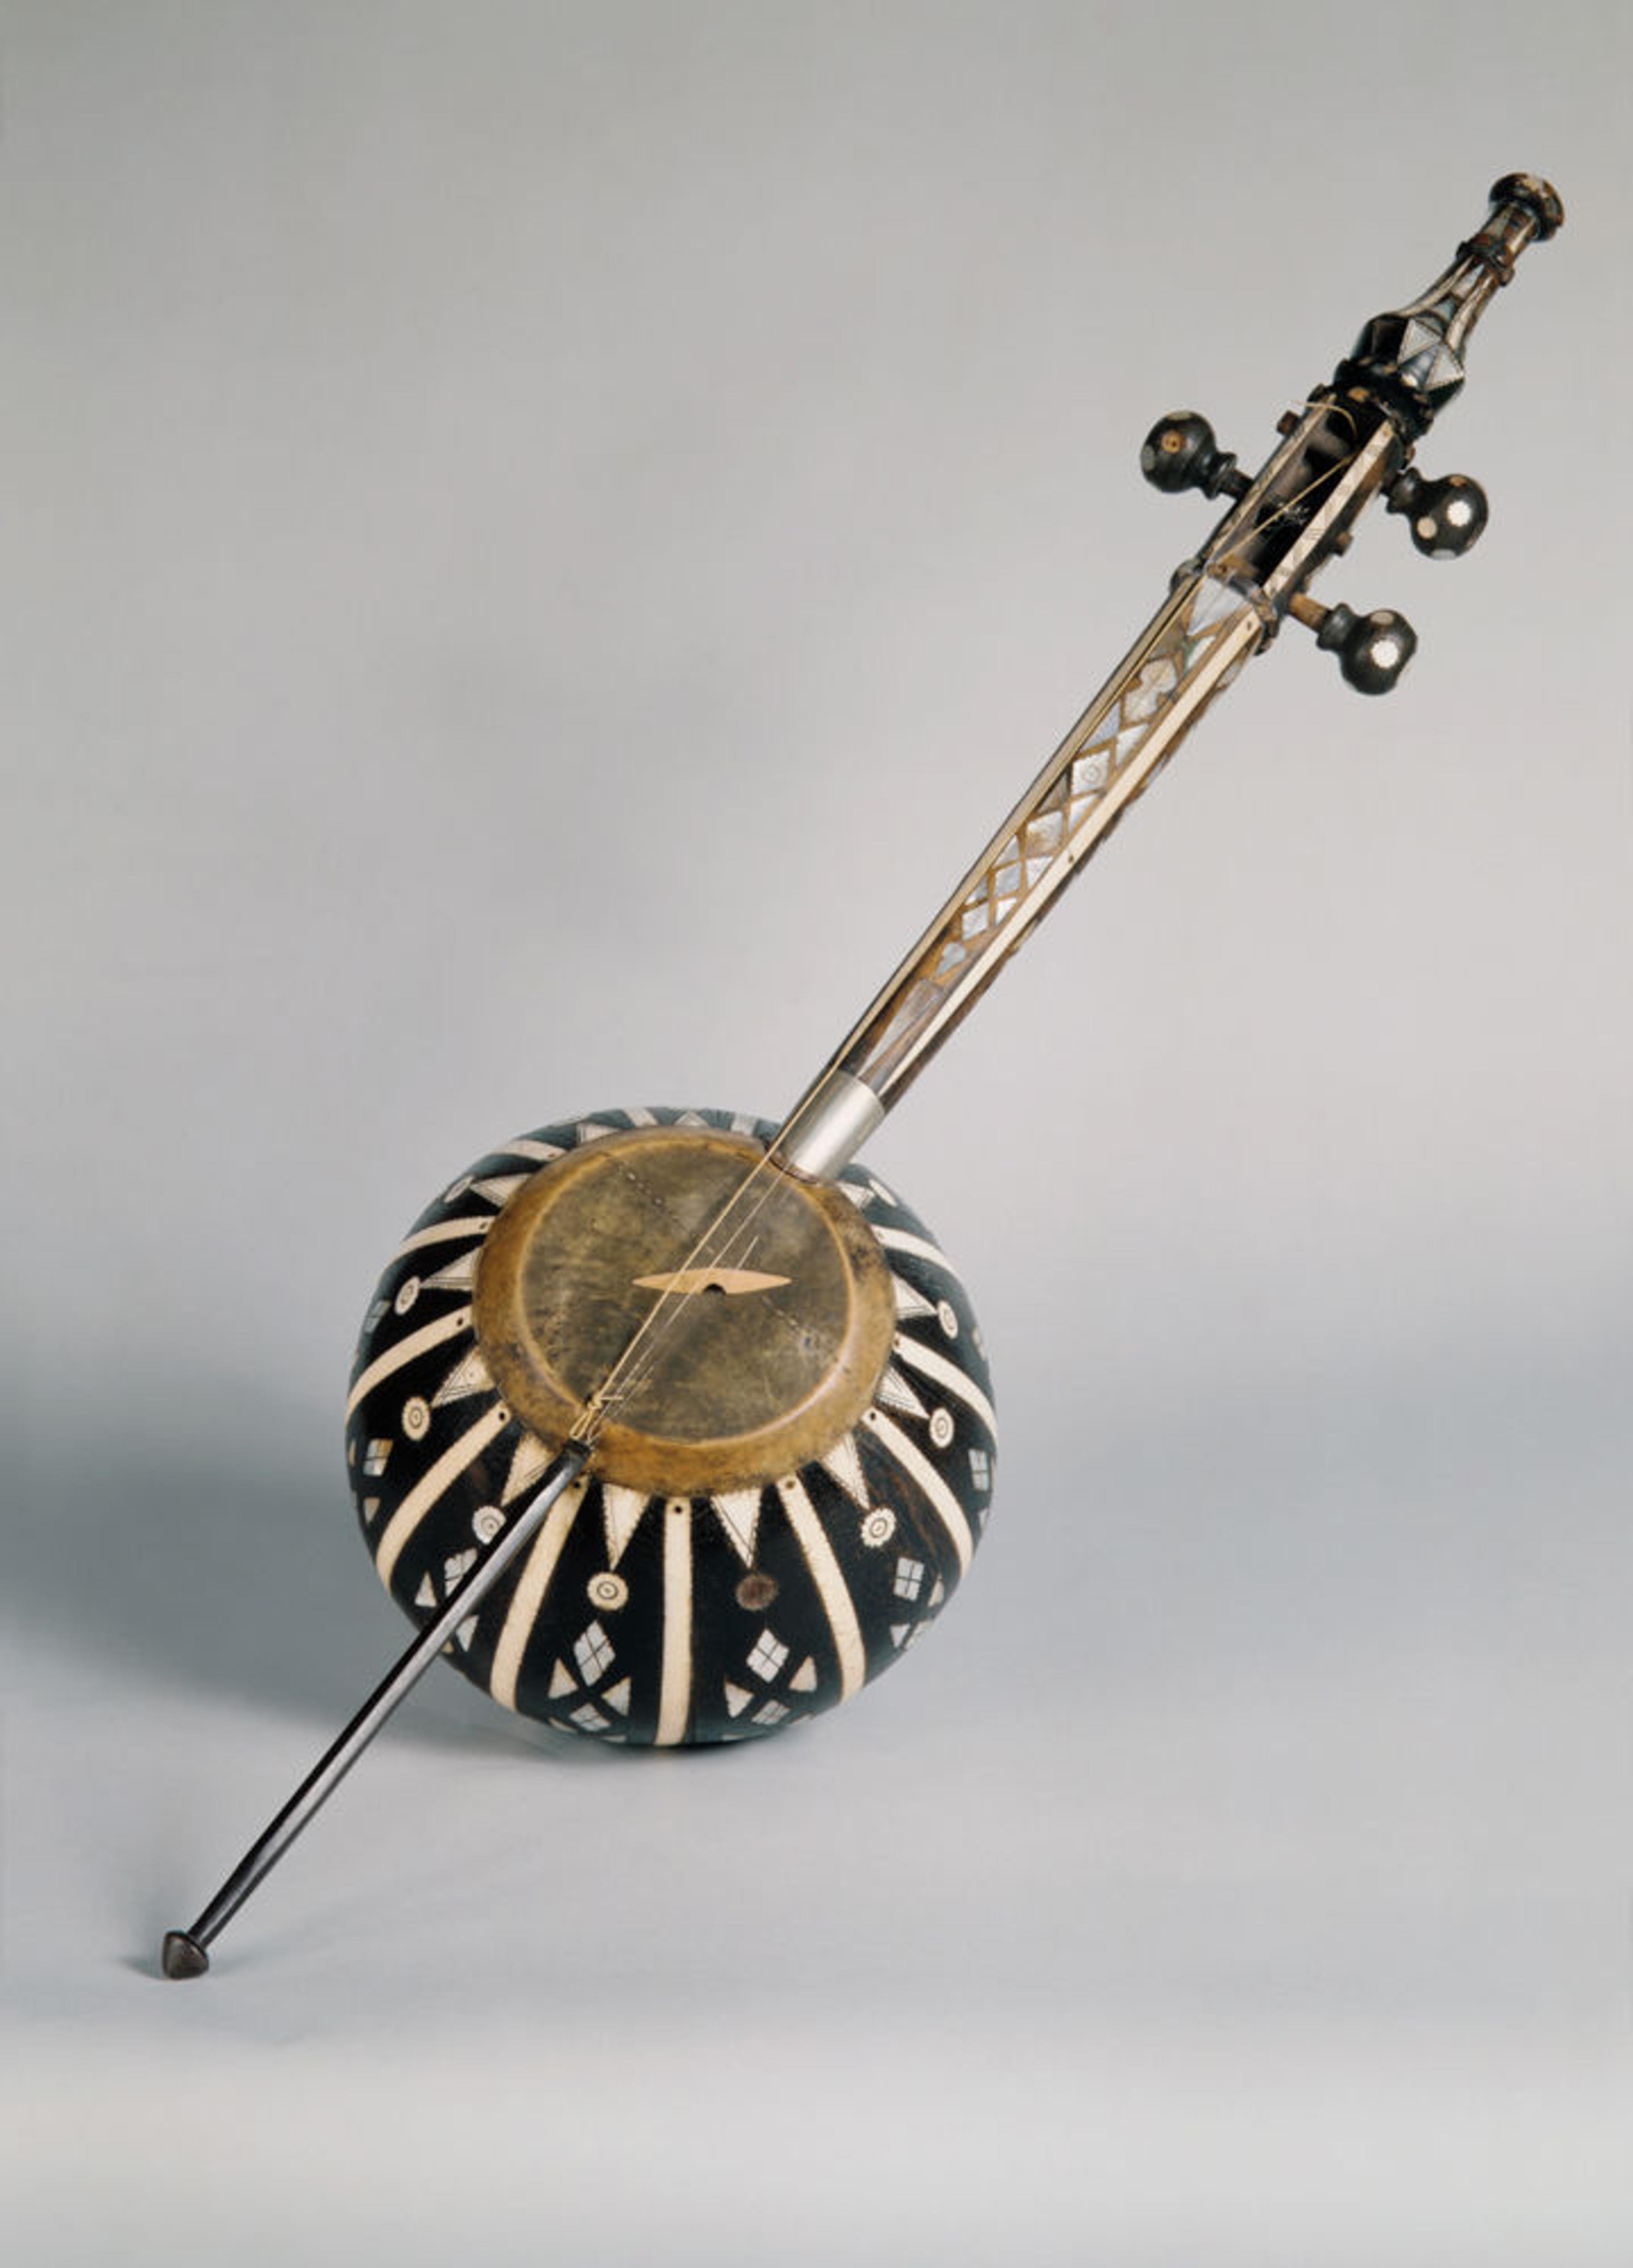 Picture of a kamanche, a bowed string instrument with a round body decorated with black and white triangular patterns.